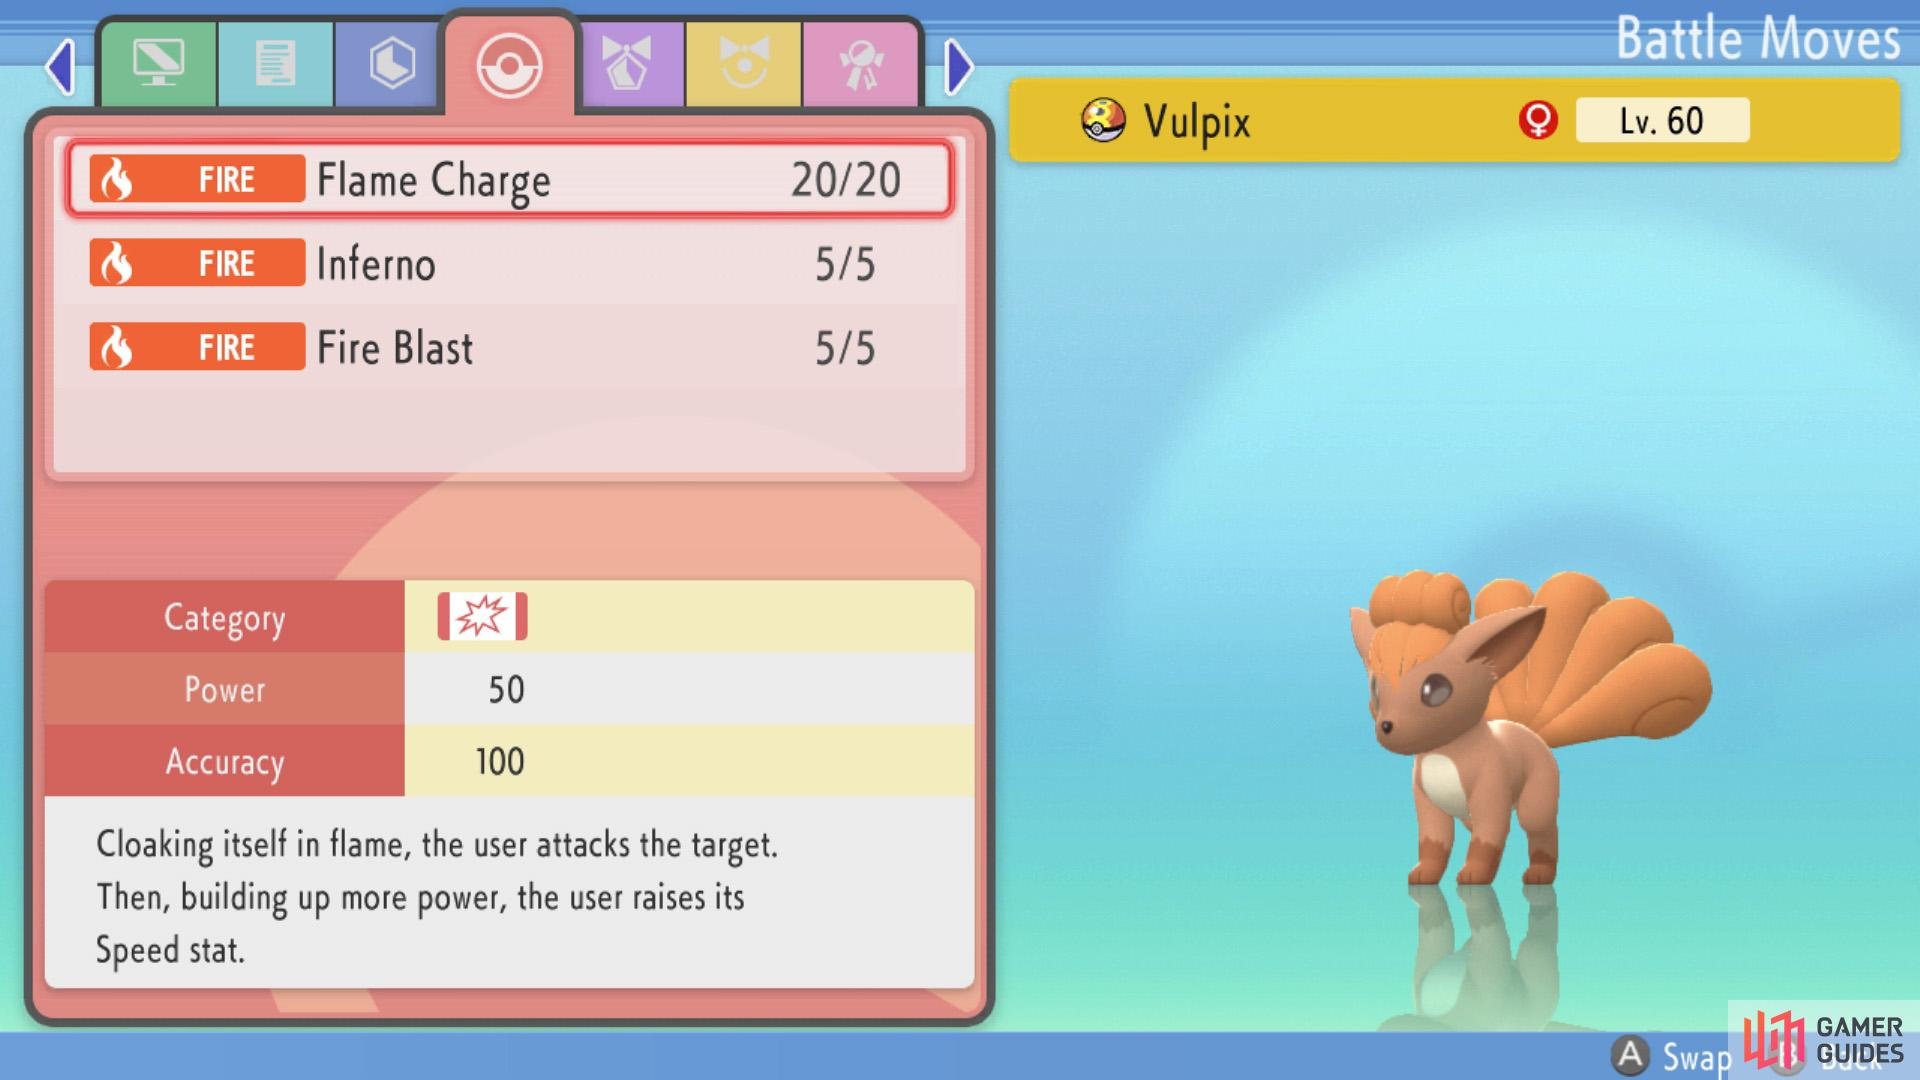 How to Relearn Moves - Raising Pokémon - Breeding and Training